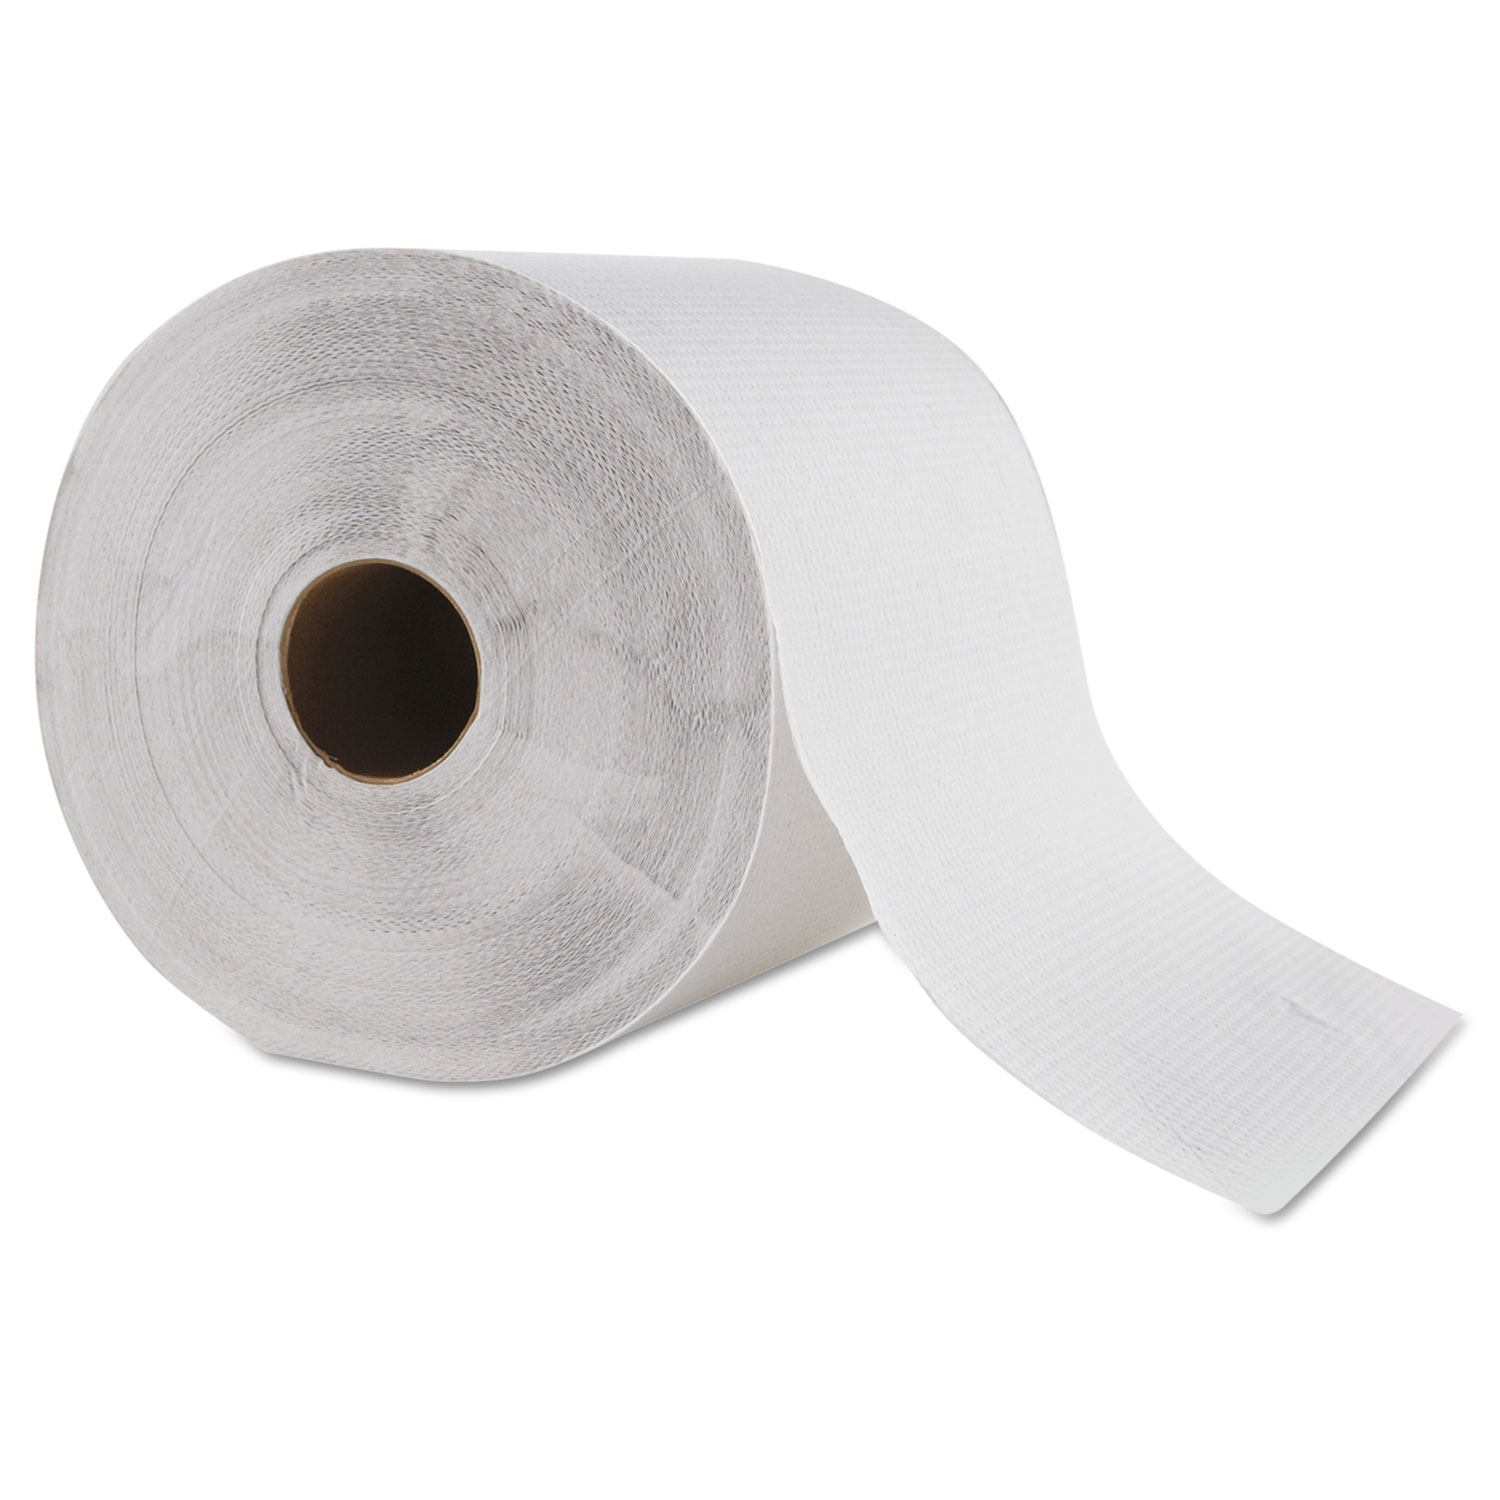 Hardwound Roll Towel, 1-Ply, White, 8 x 700 ft, 6 Roll/Carton